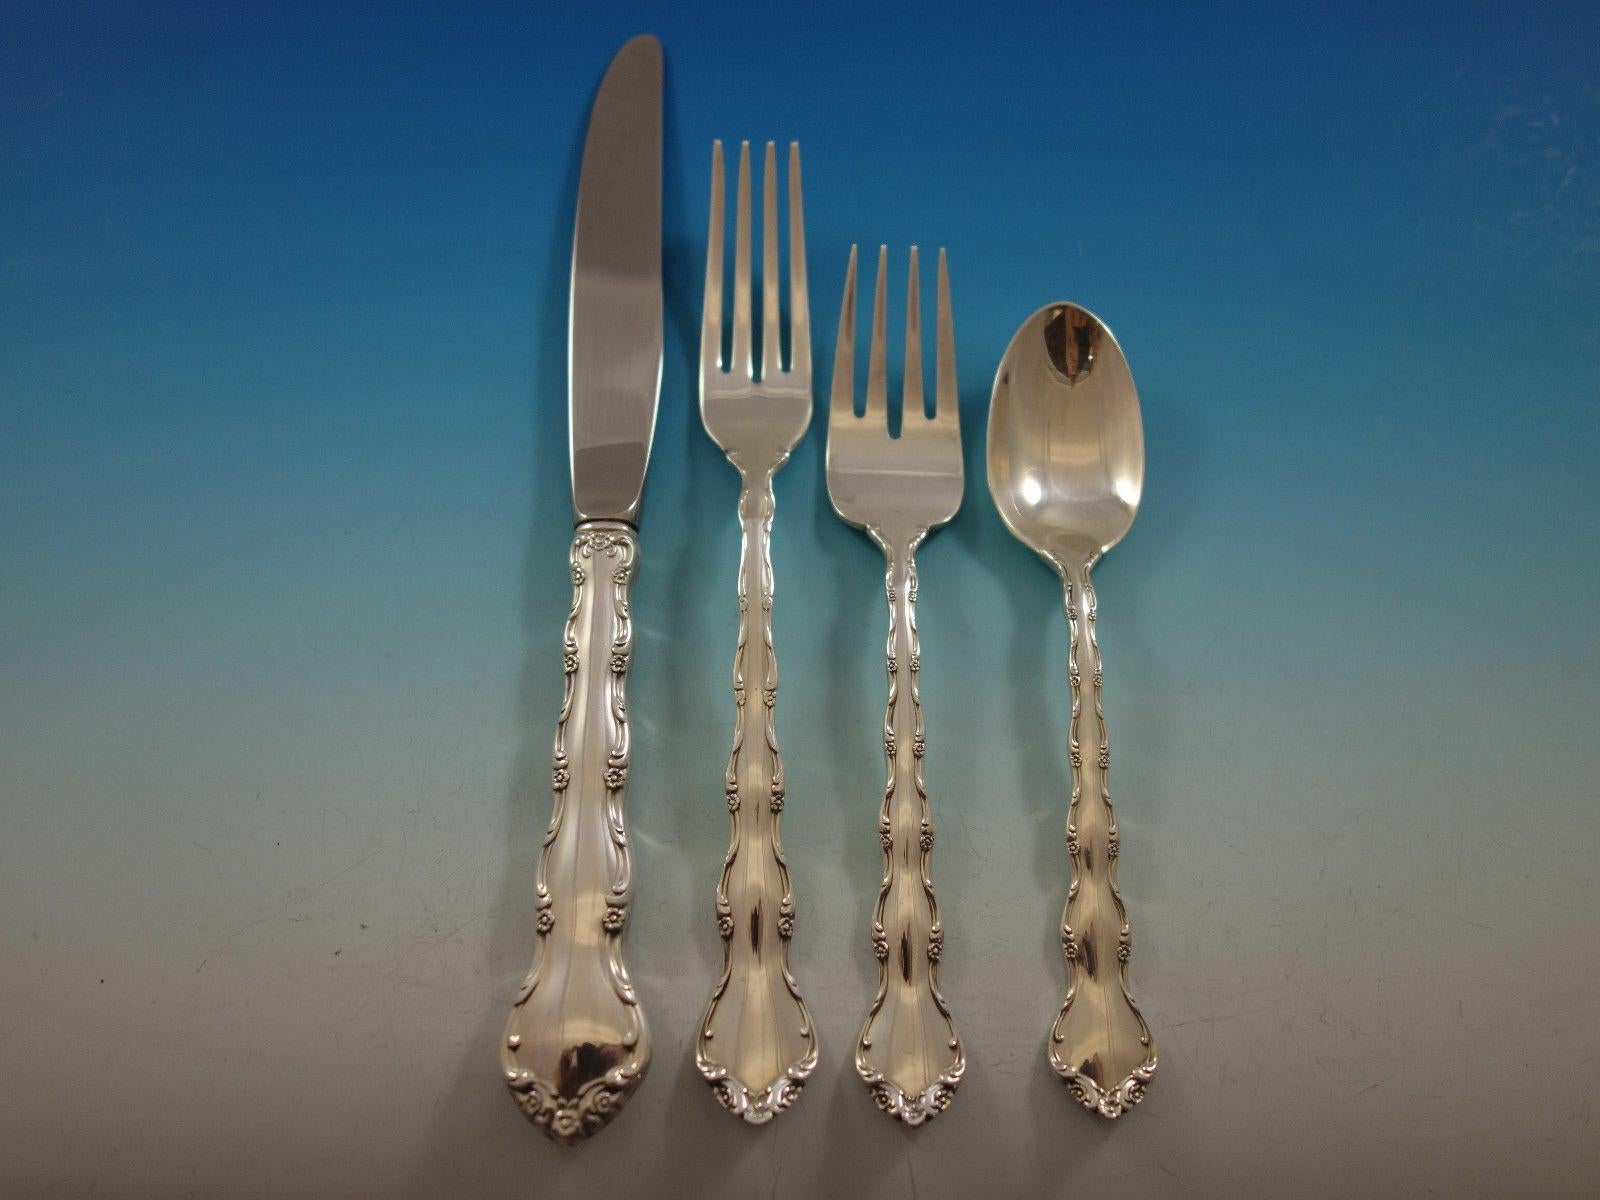 Tara by Reed and Barton sterling silver Flatware set, 60 pieces. Great starter set! This set includes:

12 Knives, 9 1/8